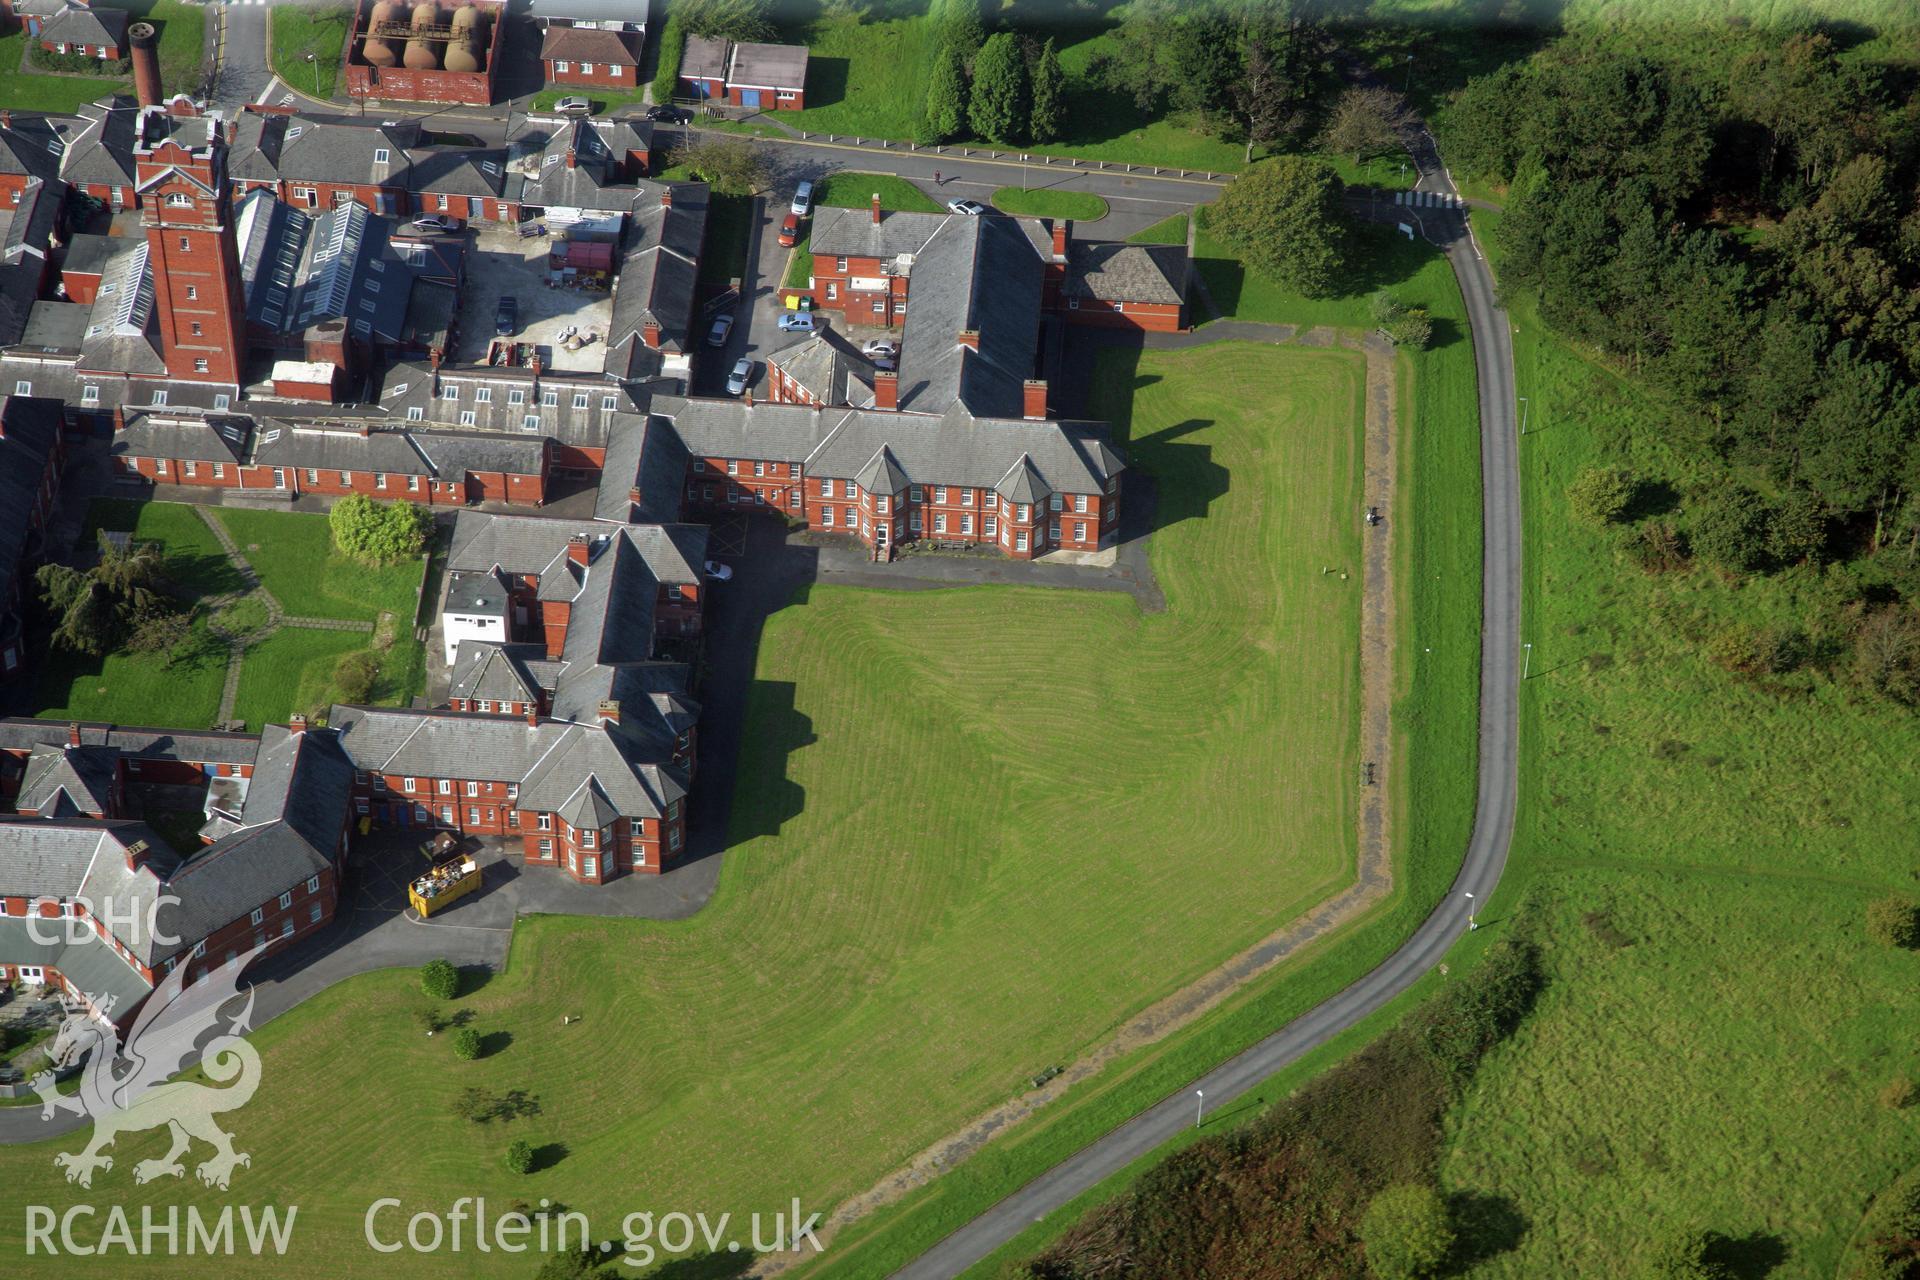 RCAHMW colour oblique photograph of Cefn Coed Hospital. Taken by Toby Driver and Oliver Davies on 28/09/2011.